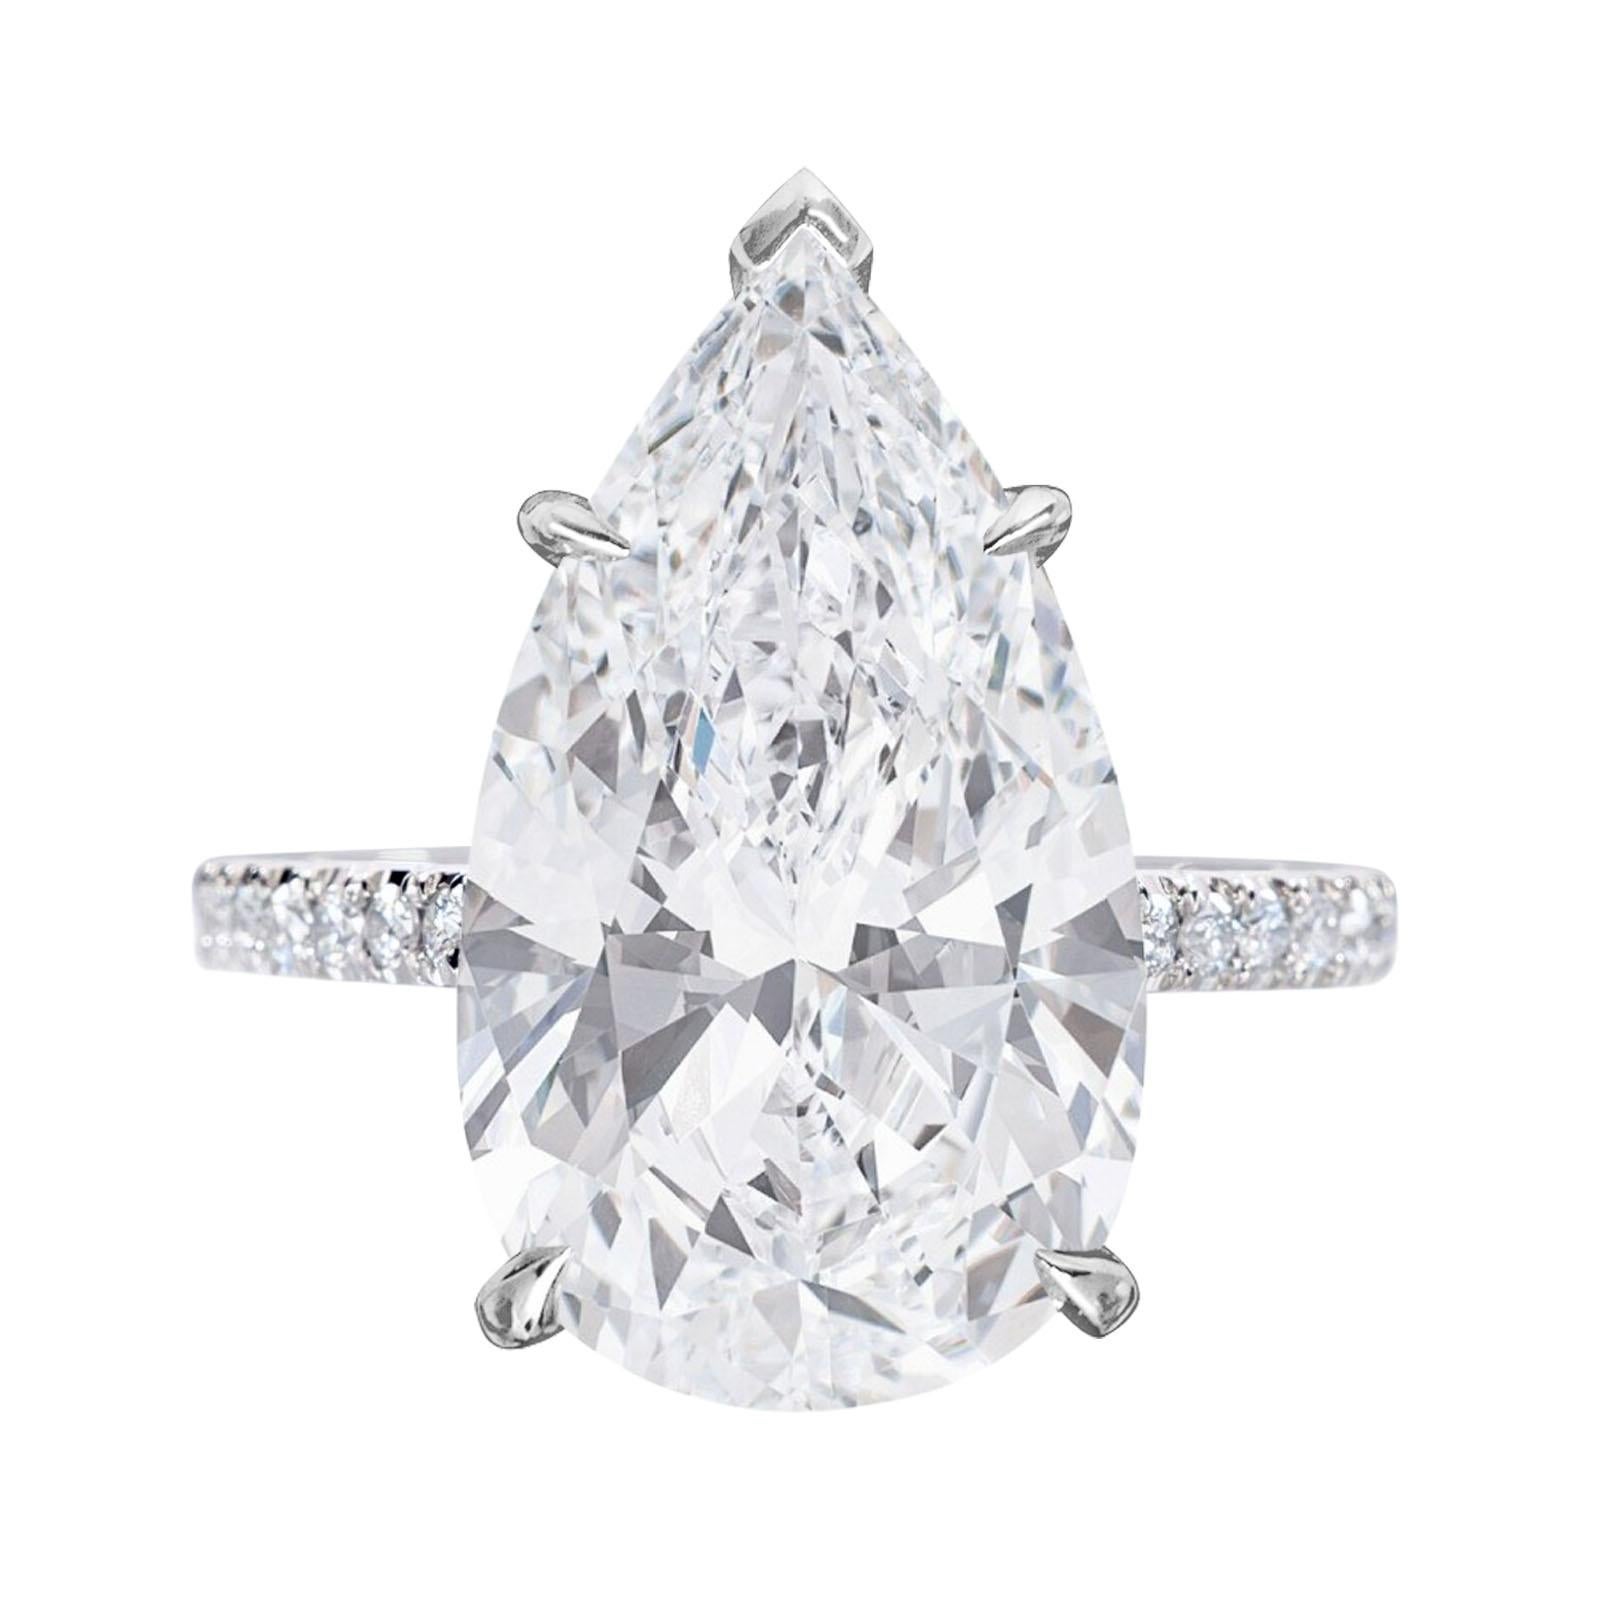 Embrace the epitome of luxury with this GIA Certified 8 Carat Pear Cut Diamond Ring adorned with pavé diamonds. At the core of this exquisite ring shines a mesmerizing pear-cut diamond, certified by the esteemed Gemological Institute of America